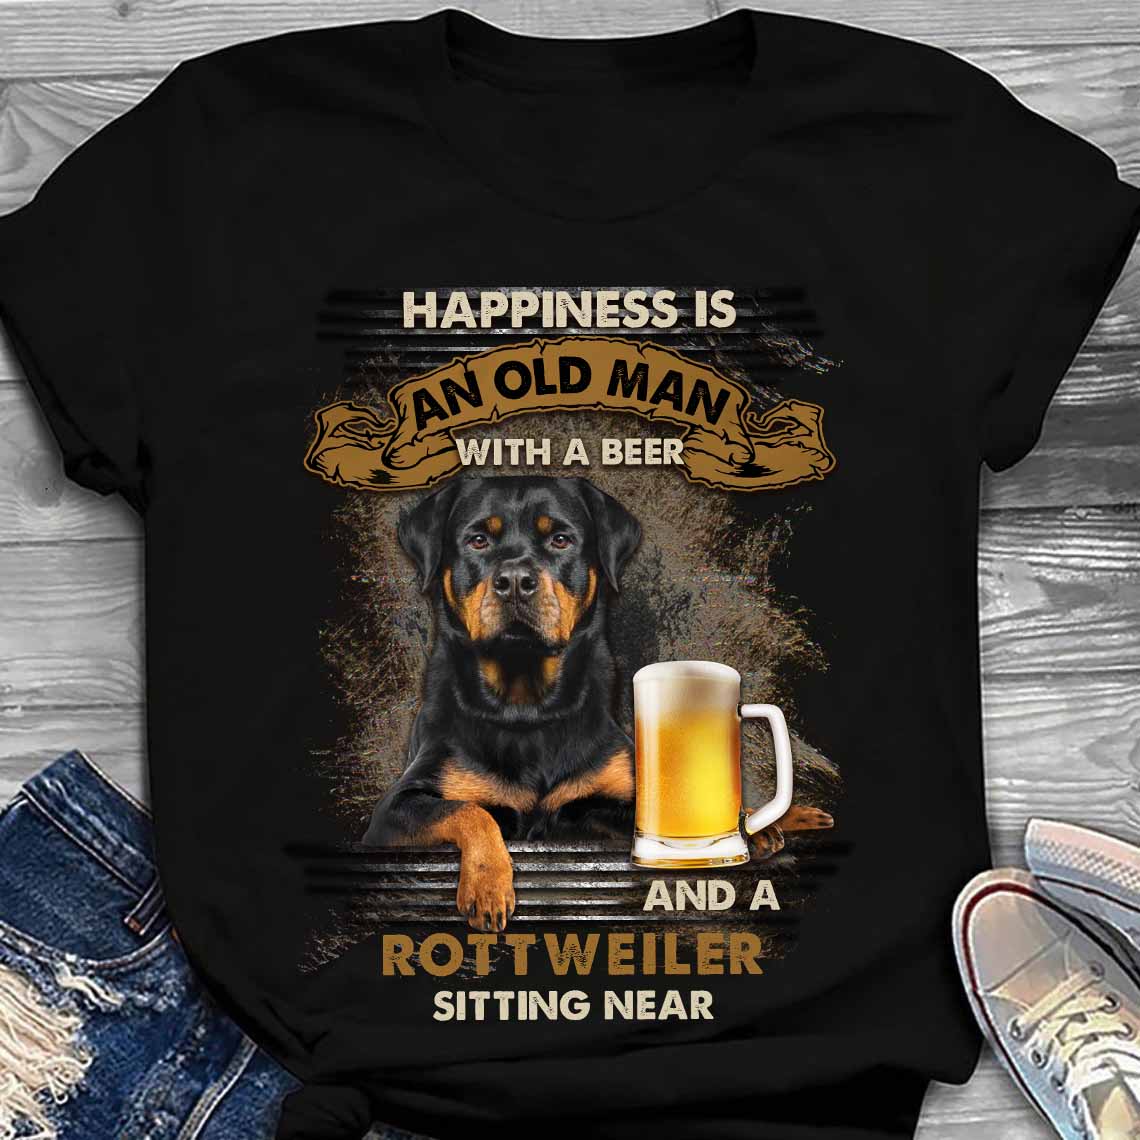 Happiness is an old man with a beer and a Rottweiler sitting near - Beer lover